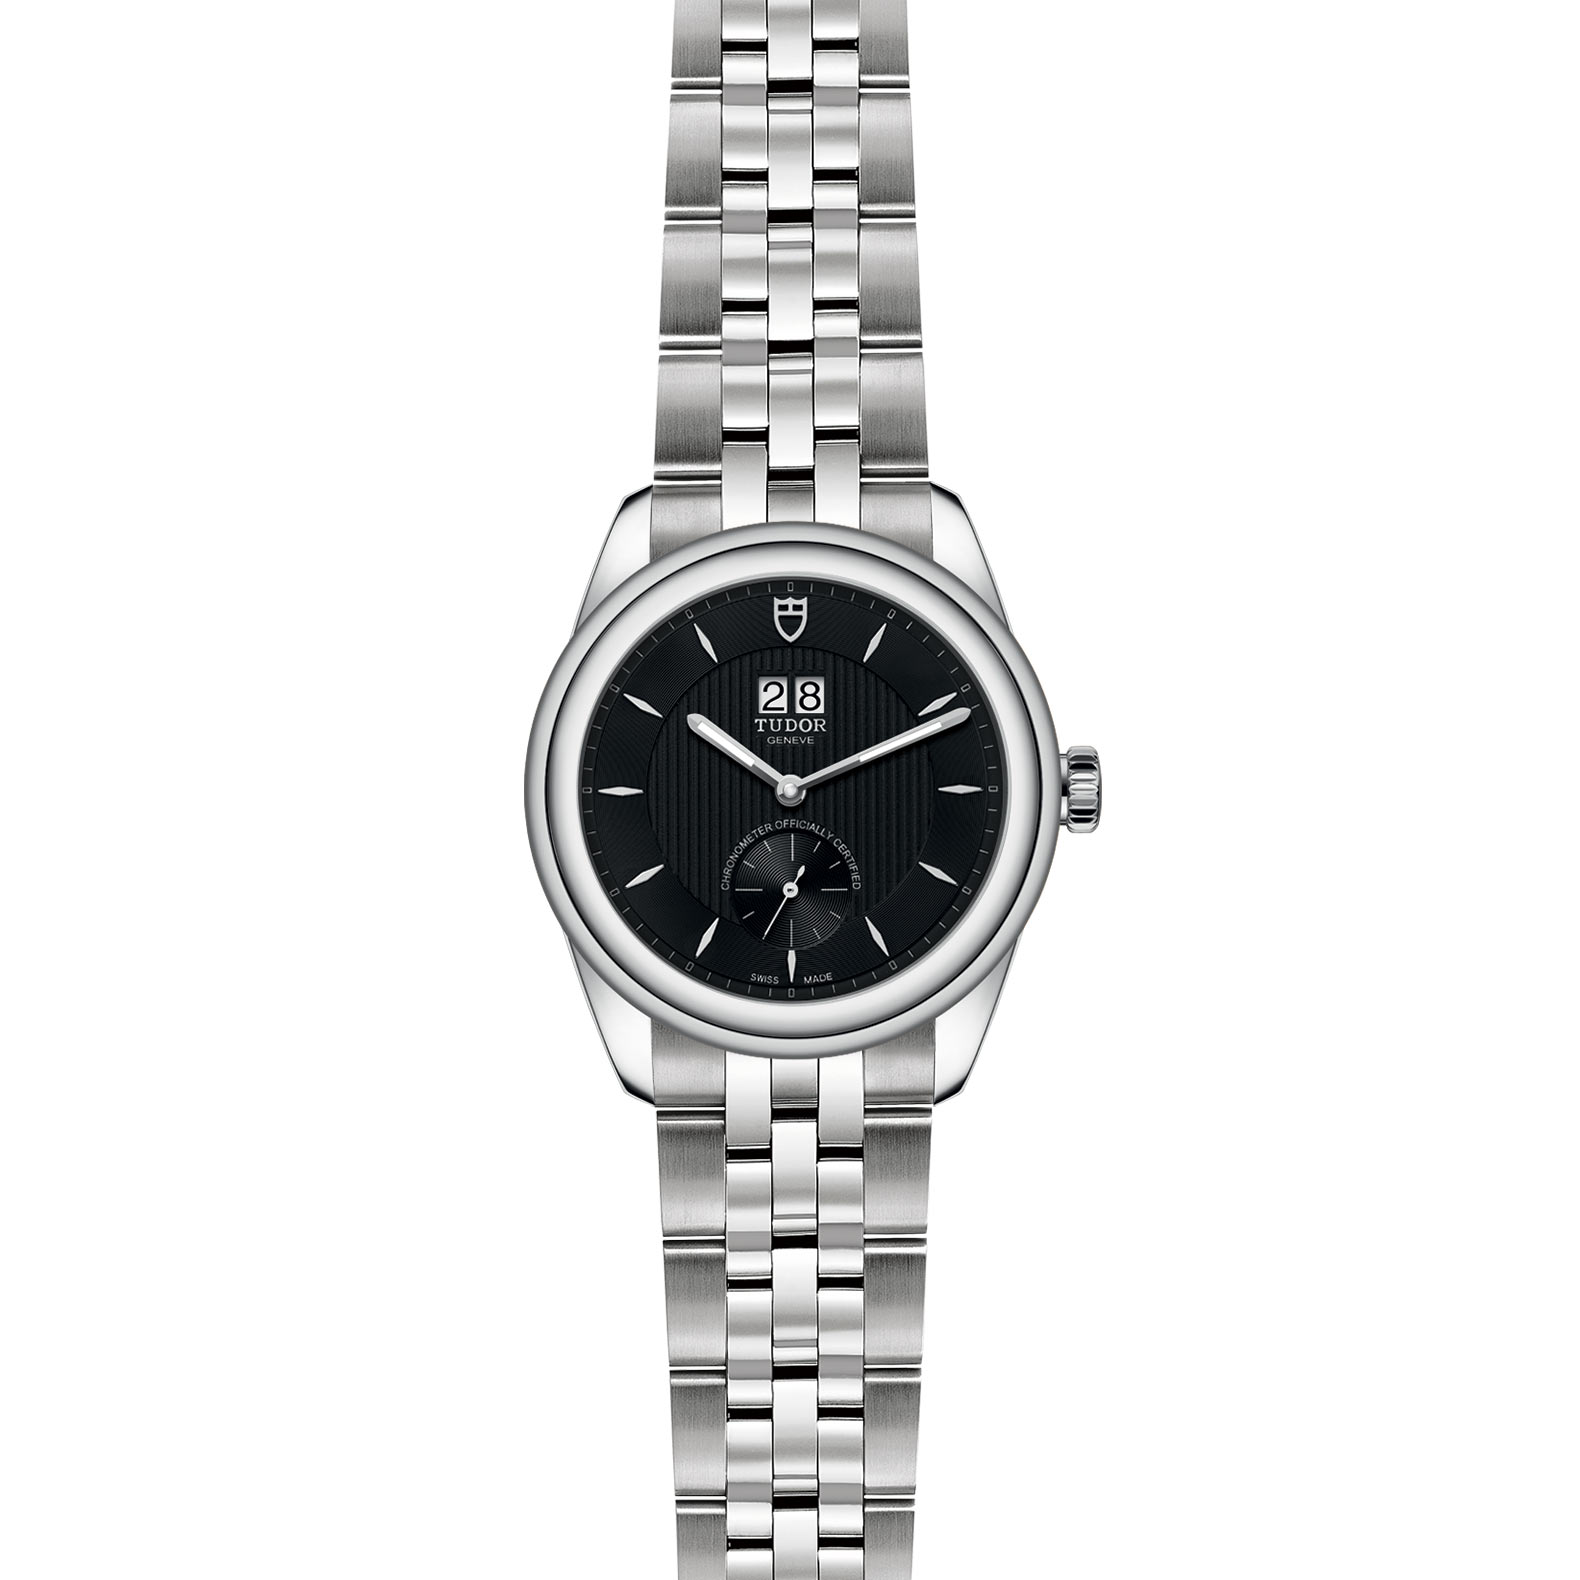 TUDOR Glamour Double Date M57100 0003 Frontfacing